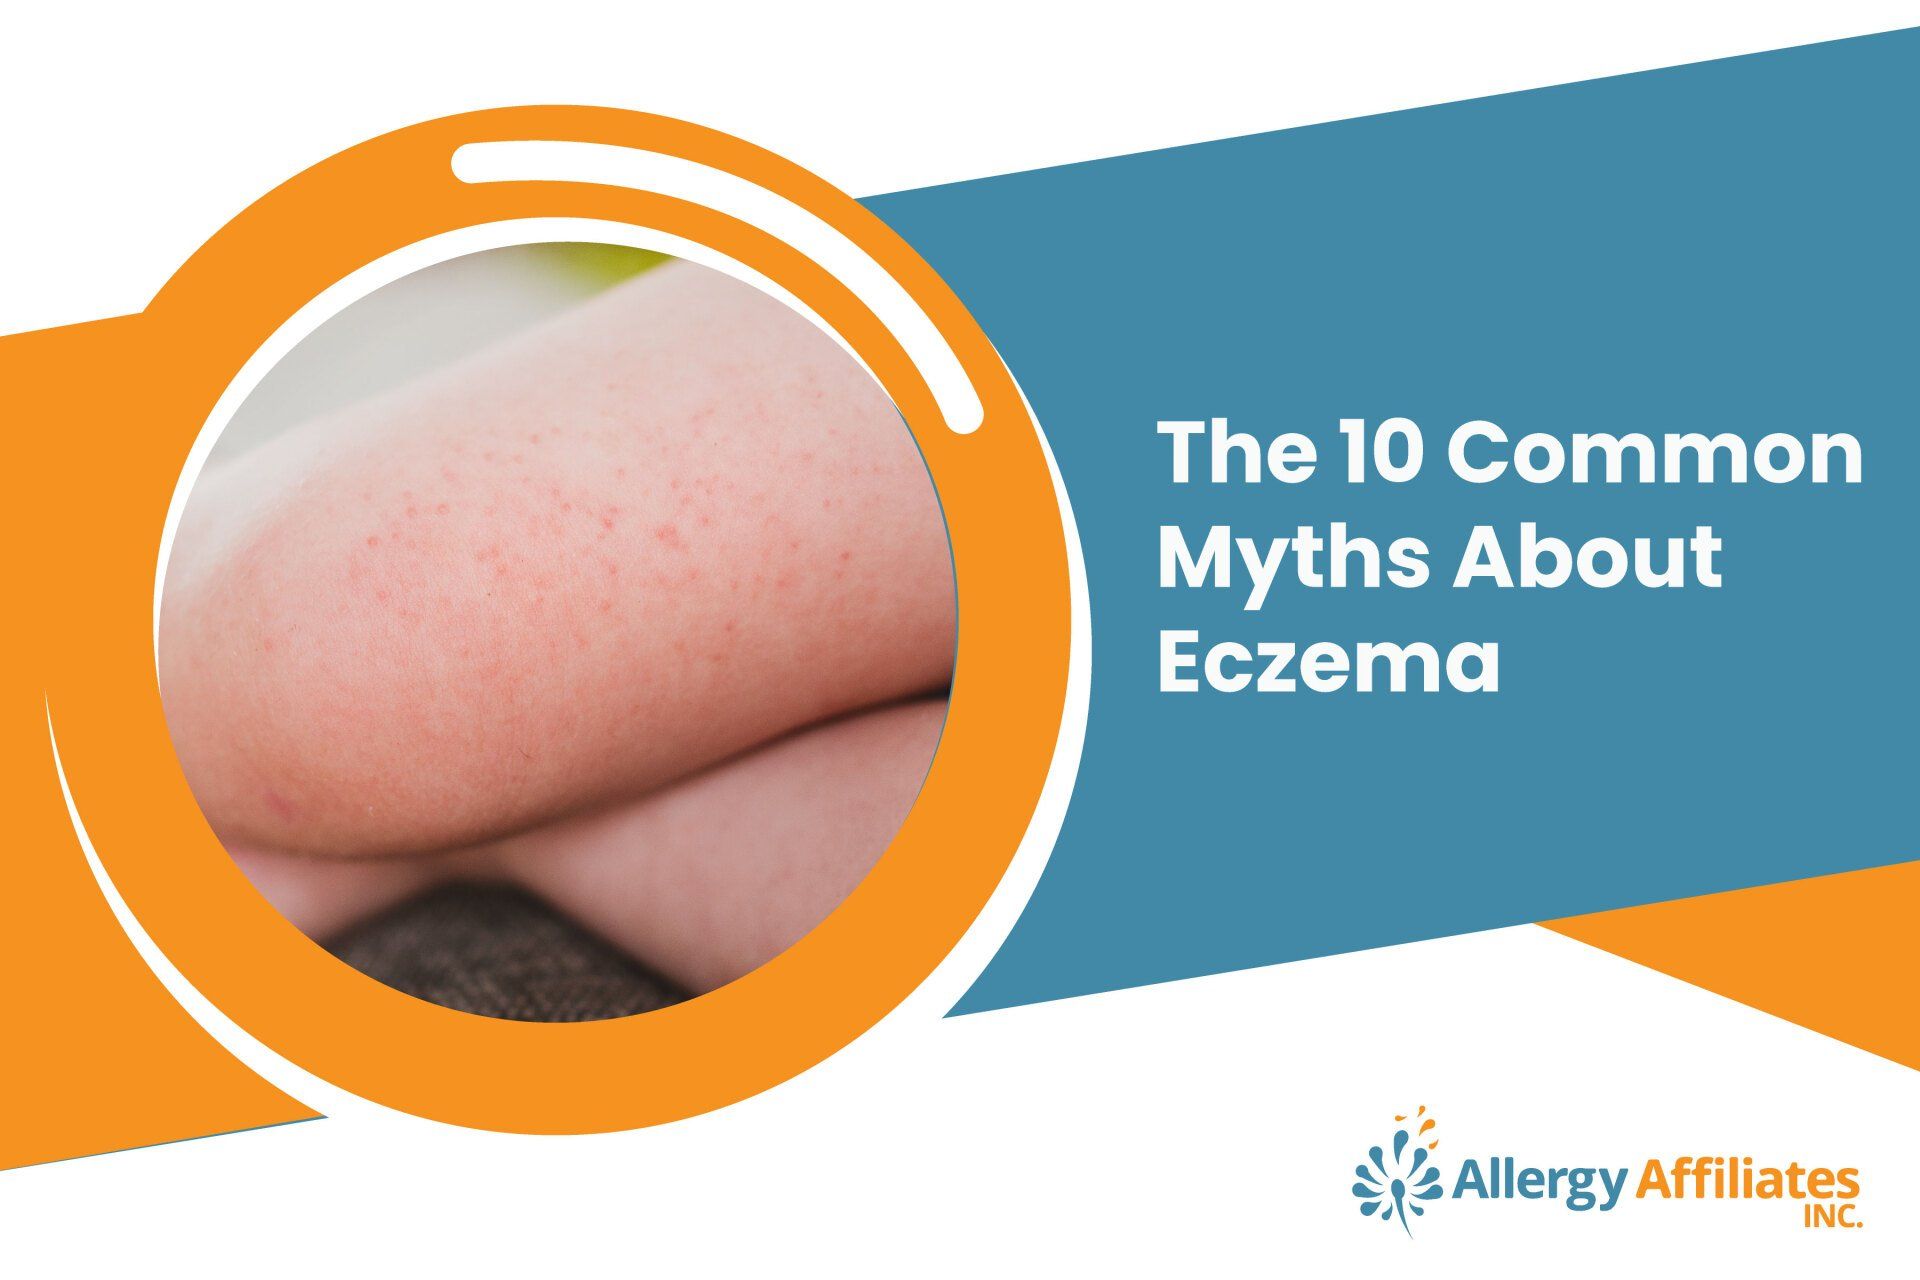 The 10 Common Myths About Eczema